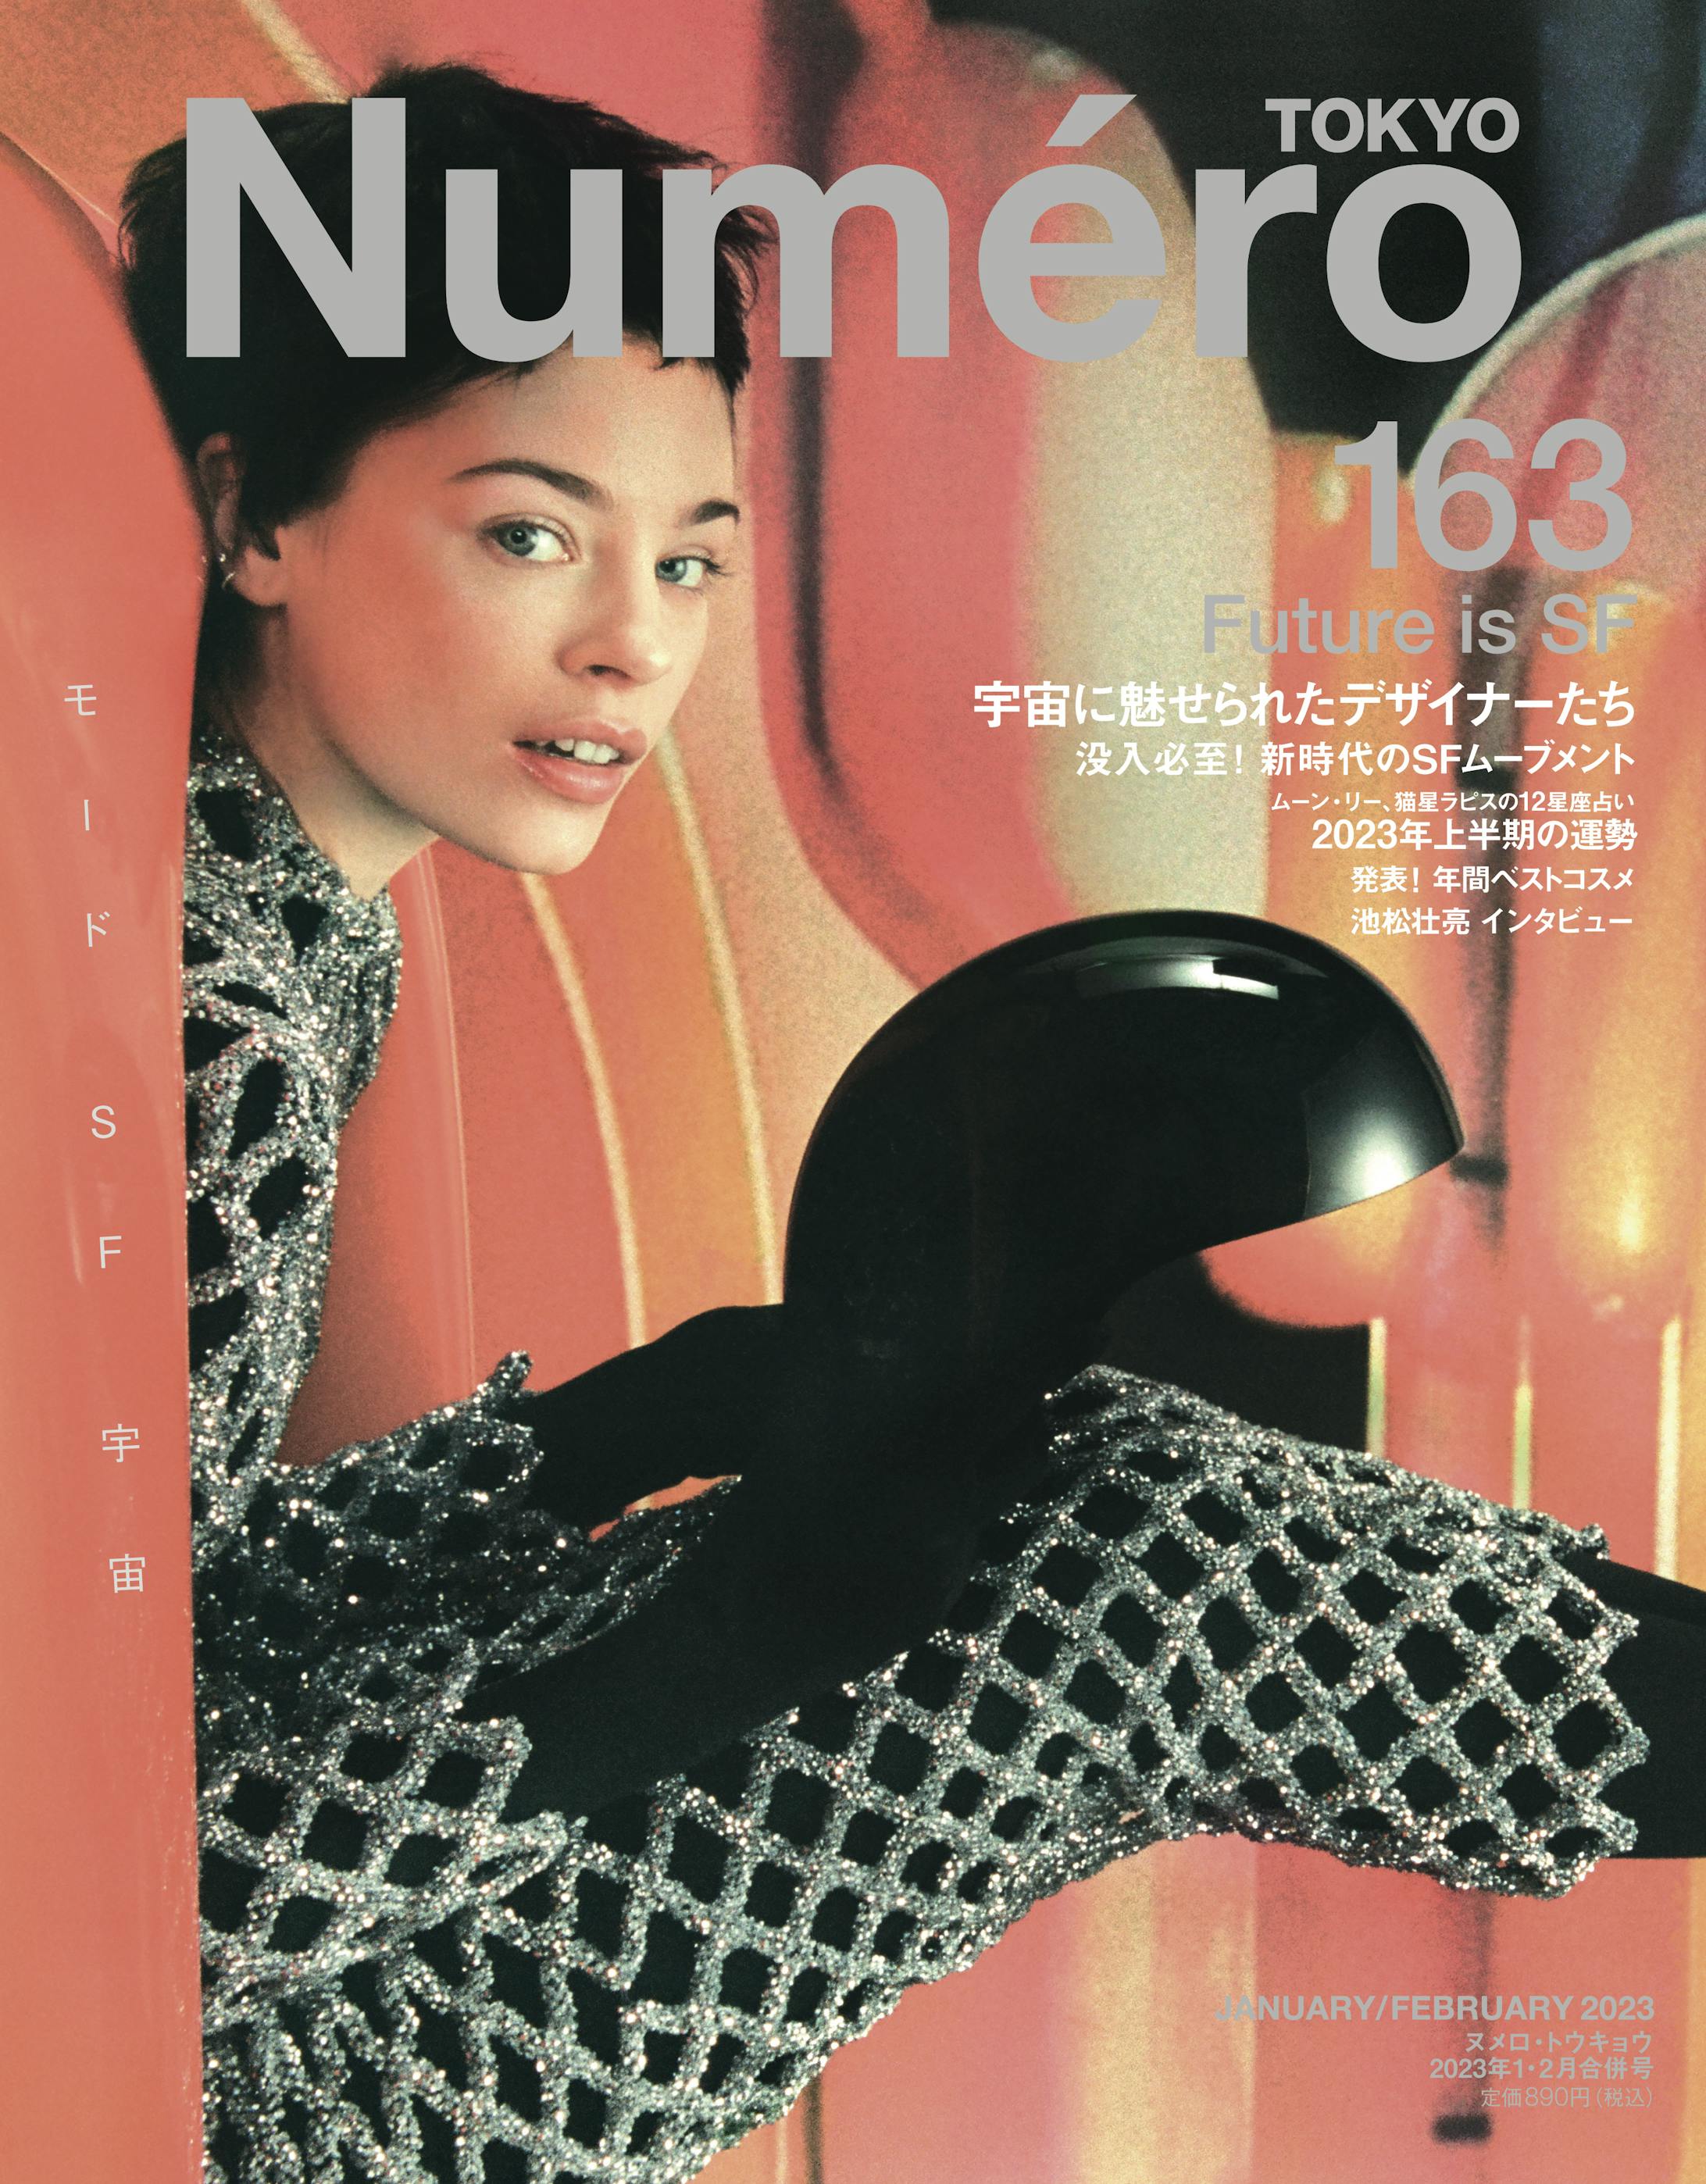 Numero Tokyo #164 2023 July/February Sci-FI issue cover story-1